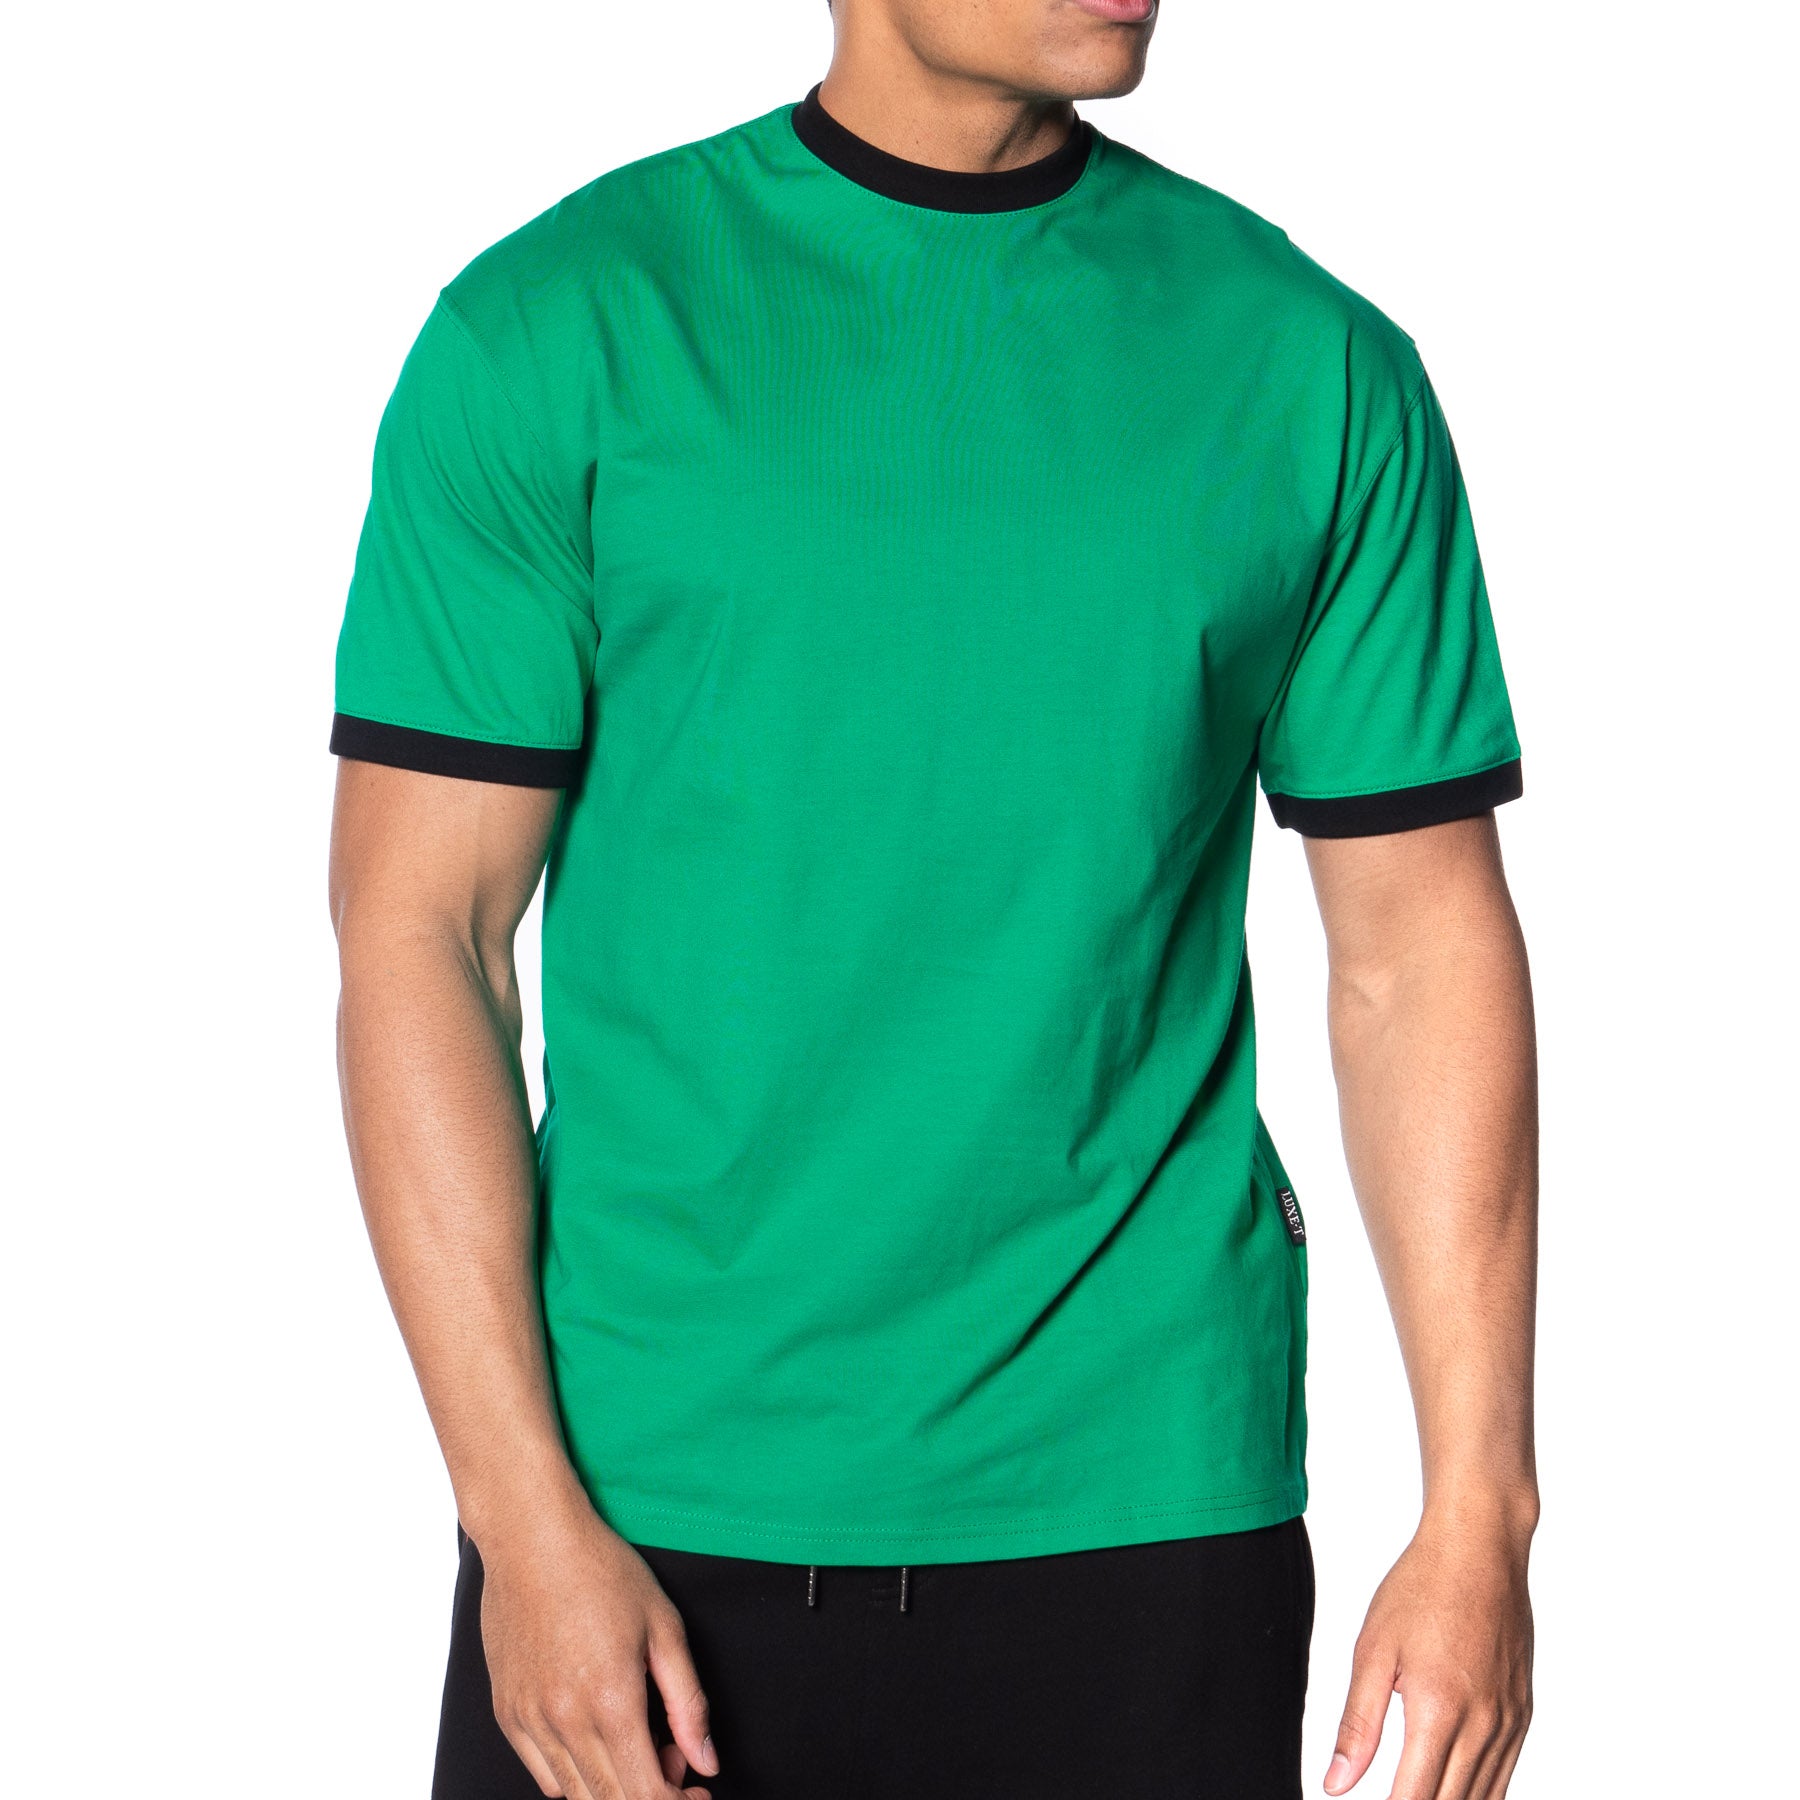 Men's 100% Combed Cotton Heavy Weight Classic Ringer T-Shirt